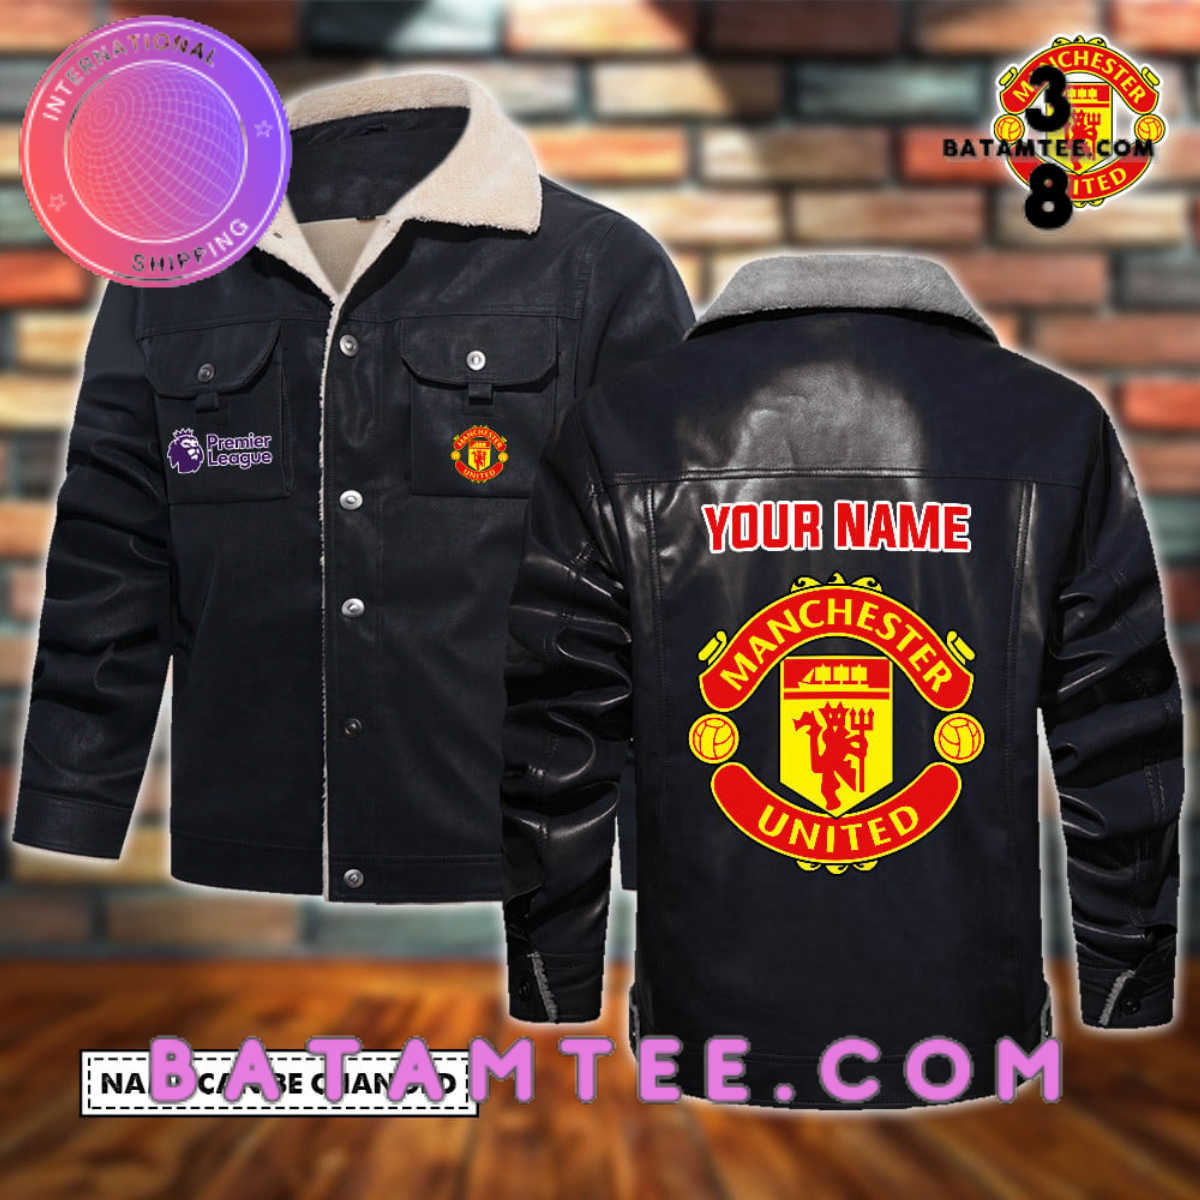 Personalized Leather jacket for Manchester United FC fans-Limited Edition's Overview - Batamtee Shop - Threads & Totes: Your Style Destination